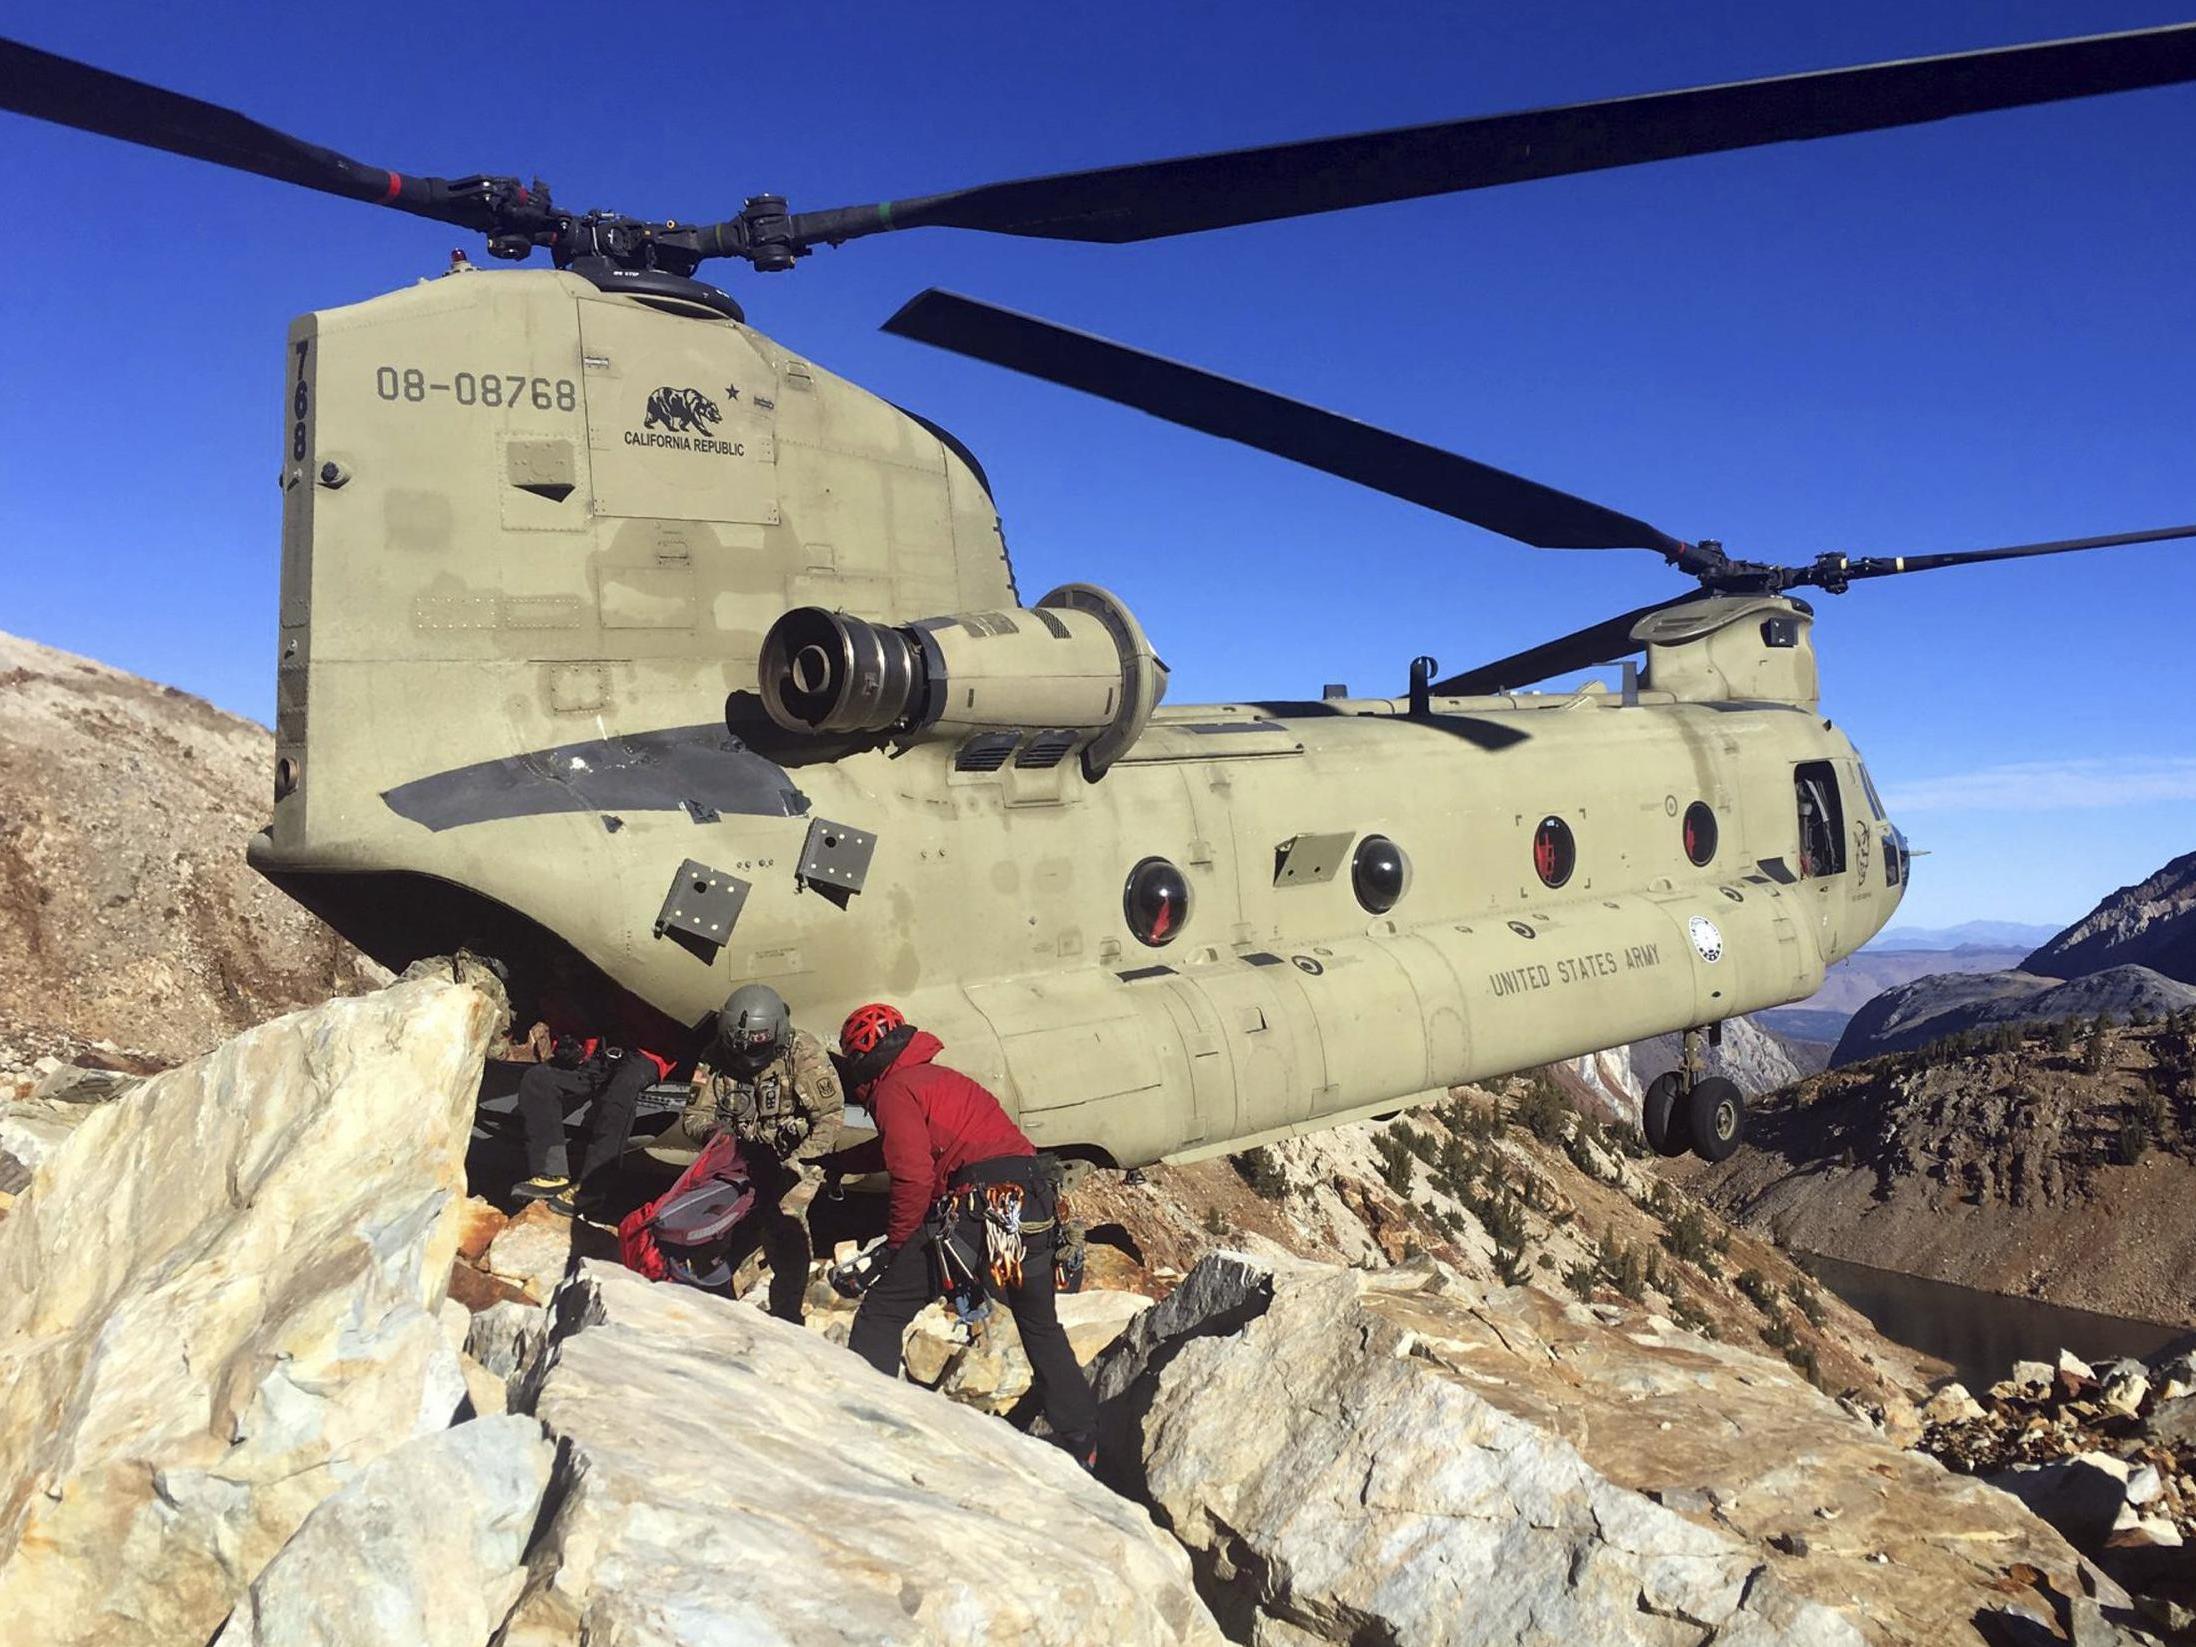 Photo provided by the Mono County Sheriff's Office shows operations to recover the bodies of two hikers who died on Red Slate Mountain in California's eastern Sierra Nevada outside of Mammoth Lakes, California.